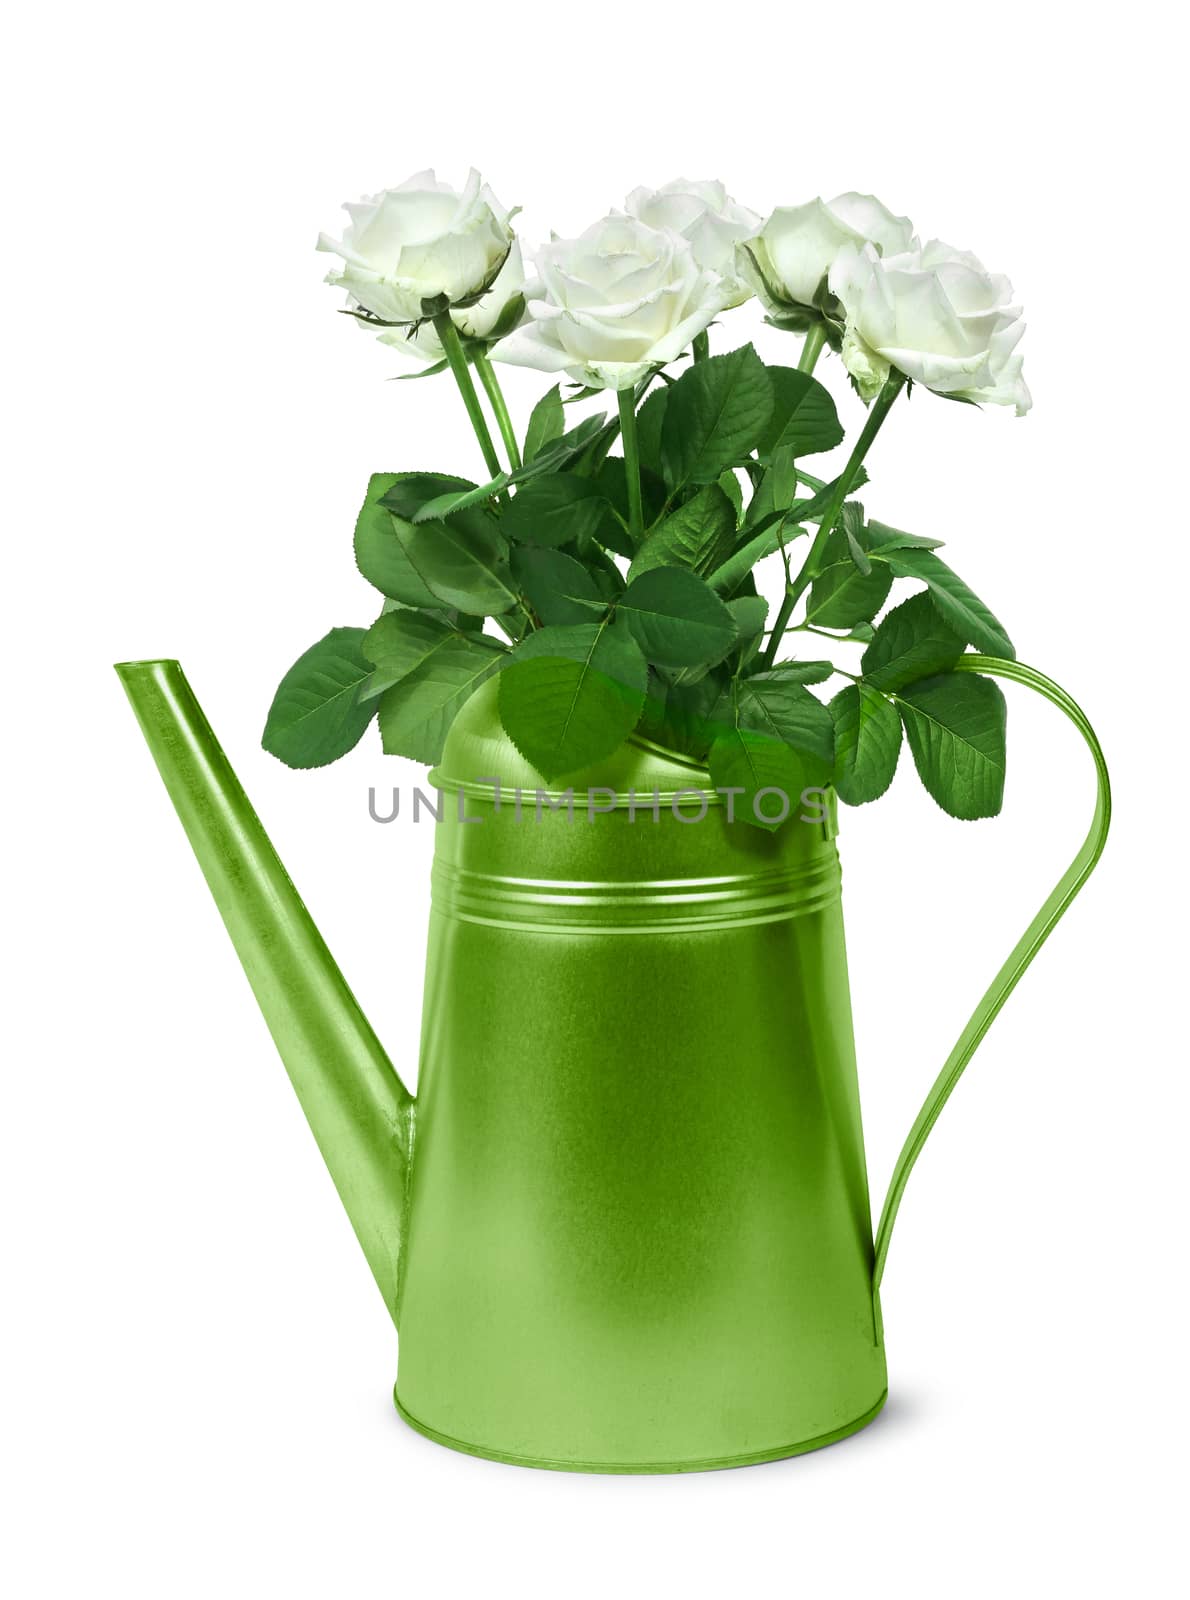 Green retro watering can with bunch of white roses